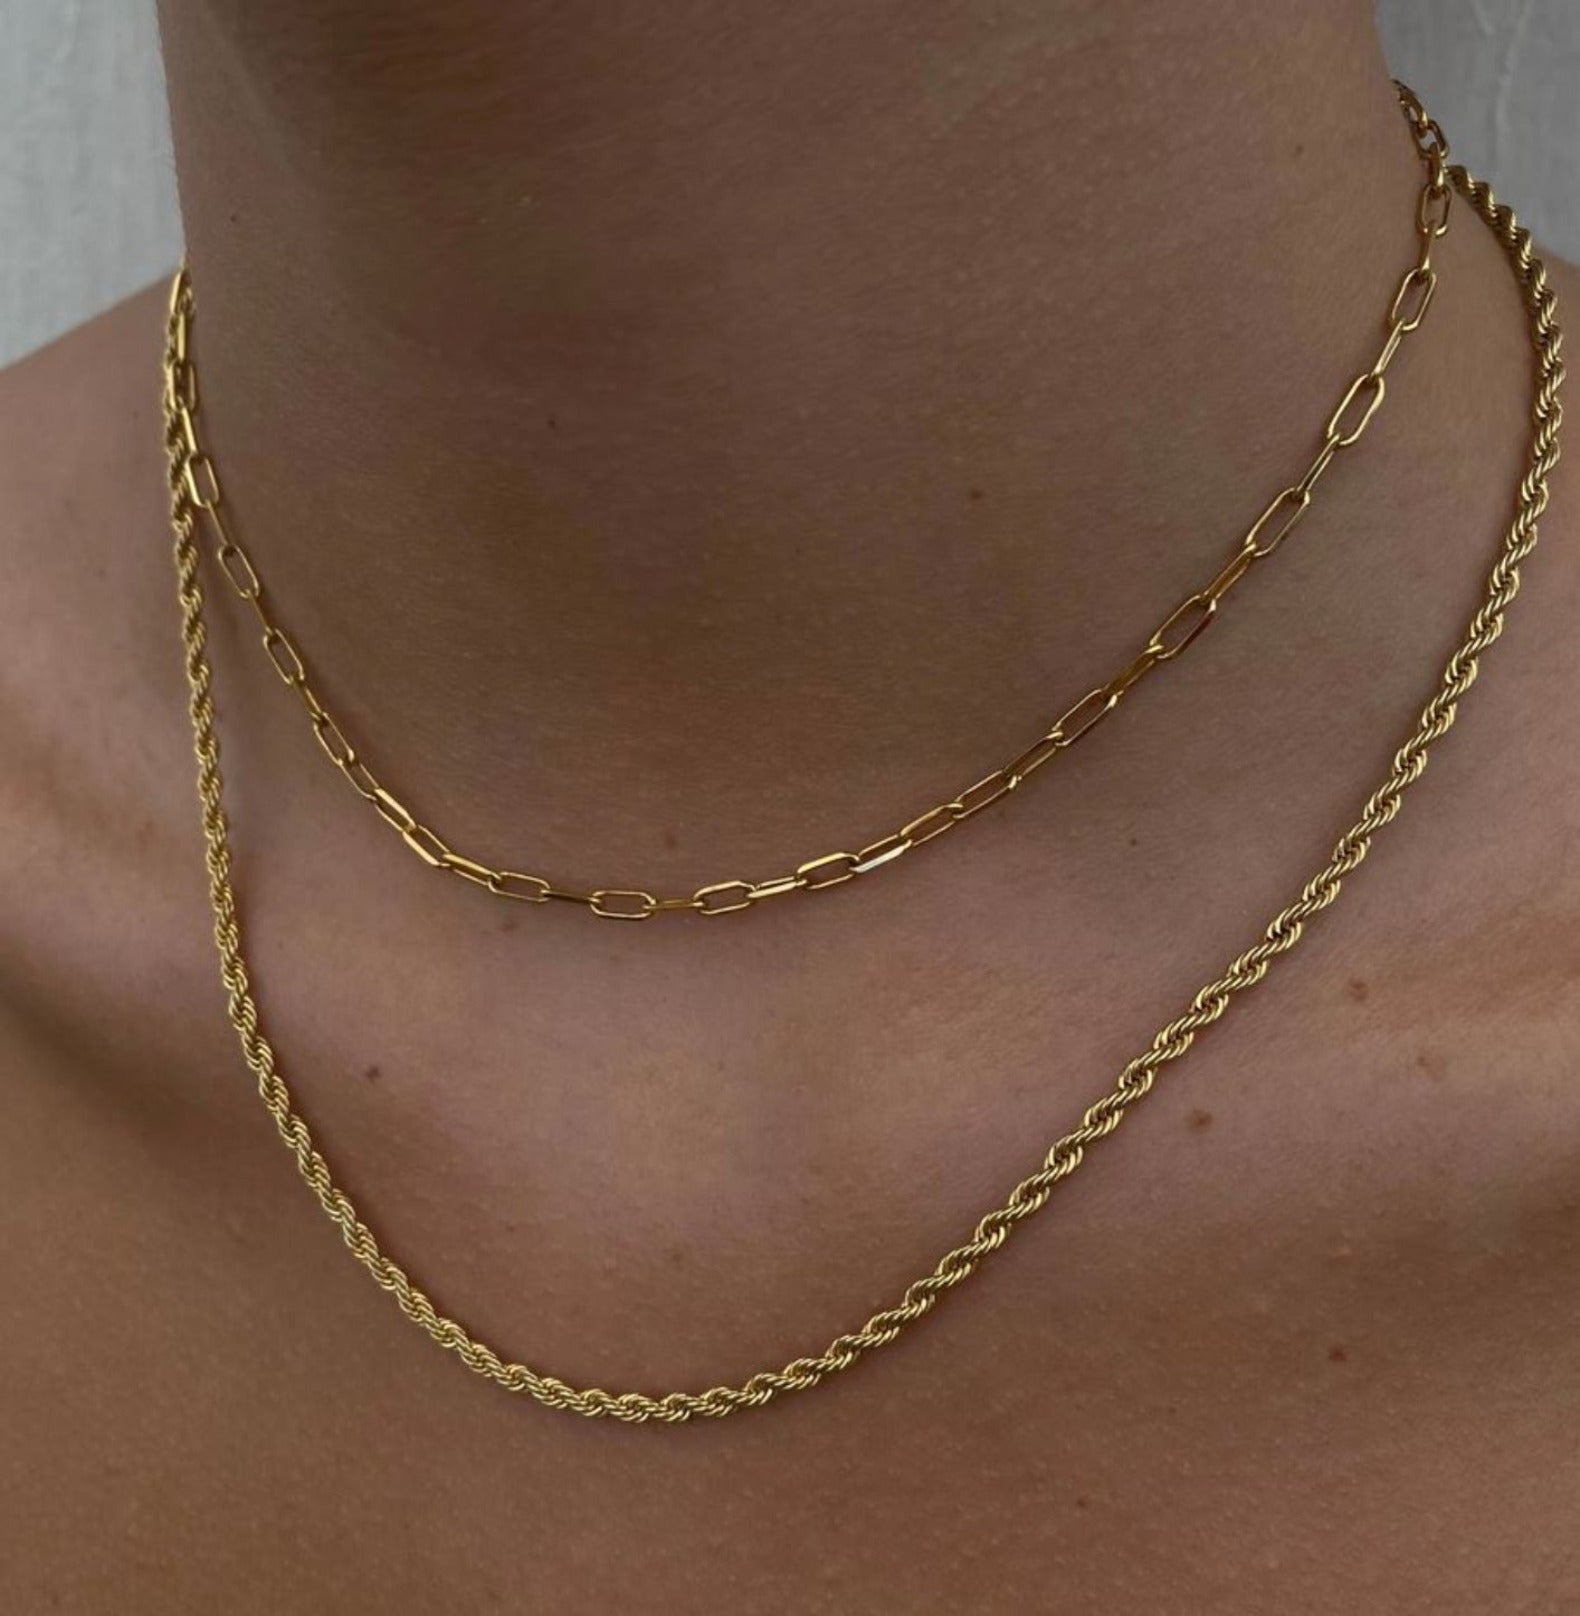 ROPE NECKLACE neck Yubama Jewelry Online Store - The Elegant Designs of Gold and Silver ! Gold 